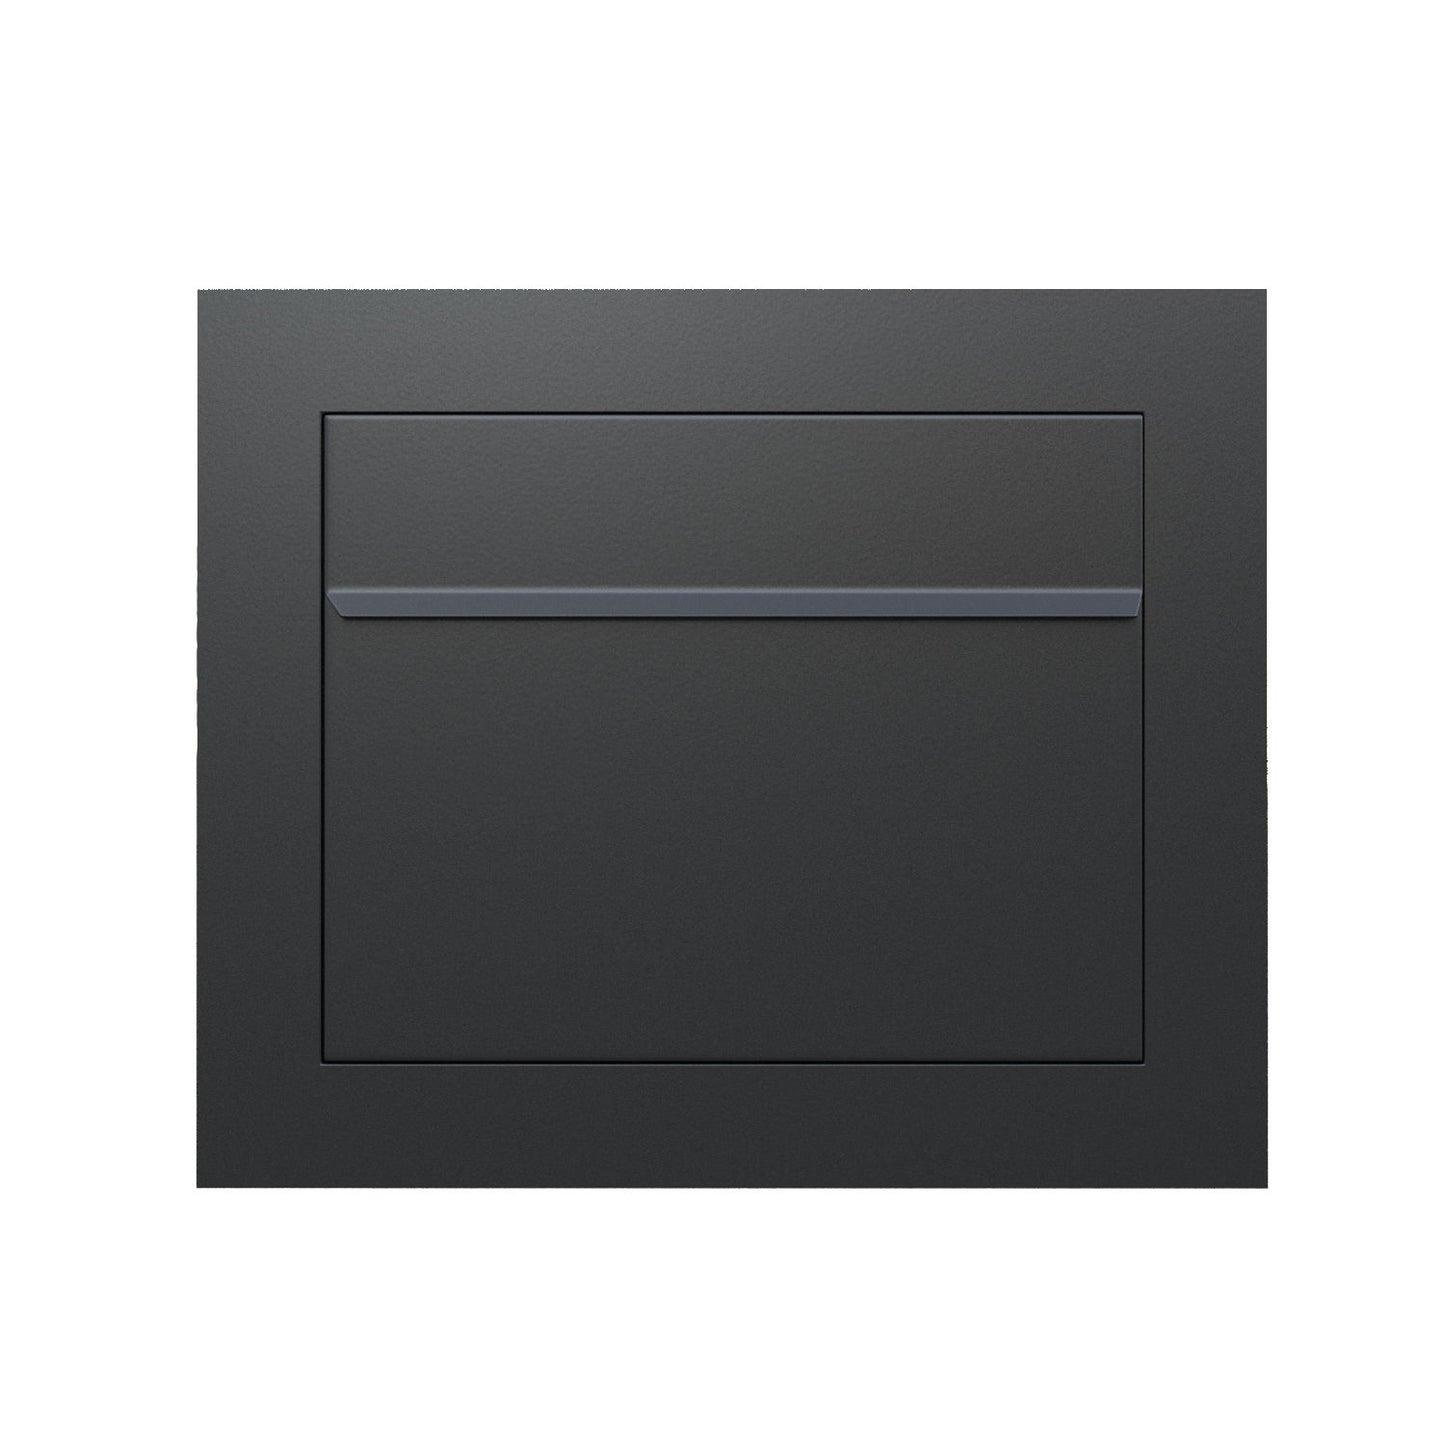 CUBIC 1 Built-in - Embedded or column locking mailbox in black